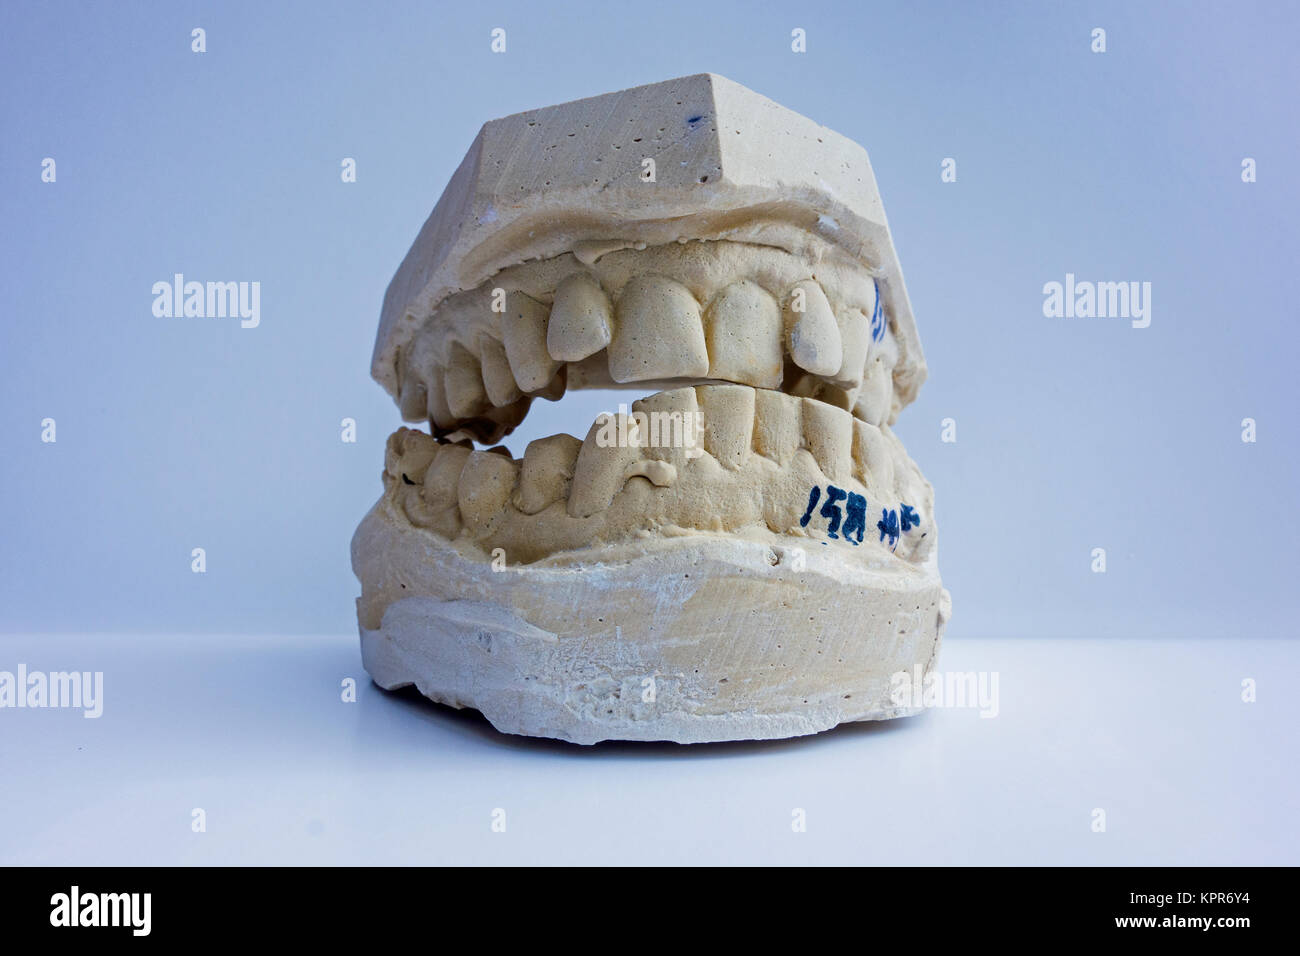 A mold , mould or impression of a man's teeth Stock Photo